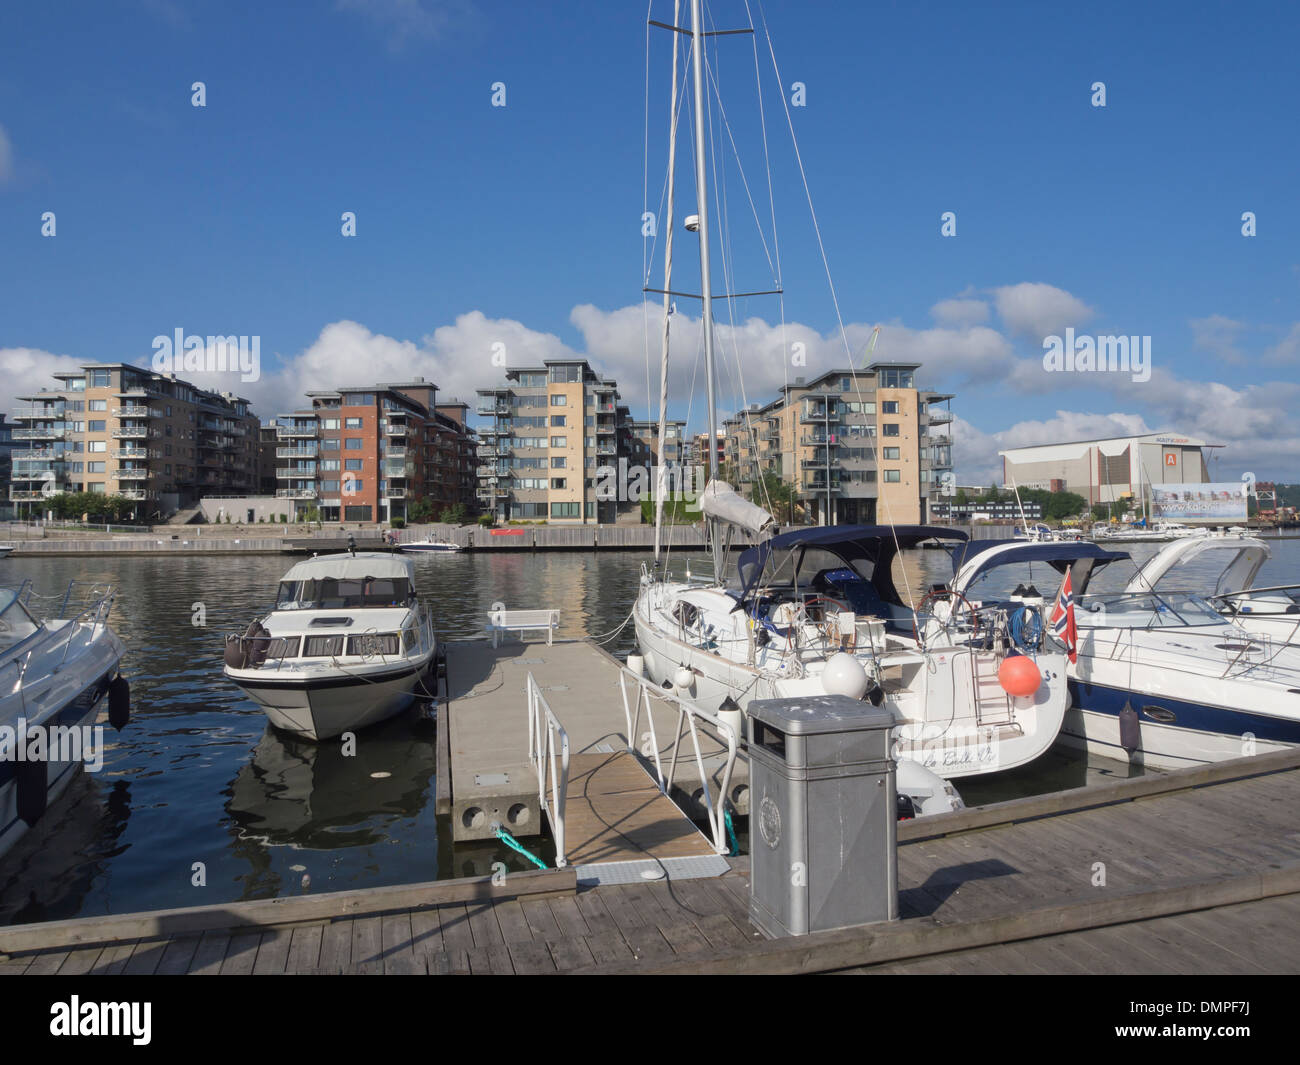 Modern blocks of flats and private boats in the town of Tønsberg Norway, a summer seaside holiday destination Stock Photo